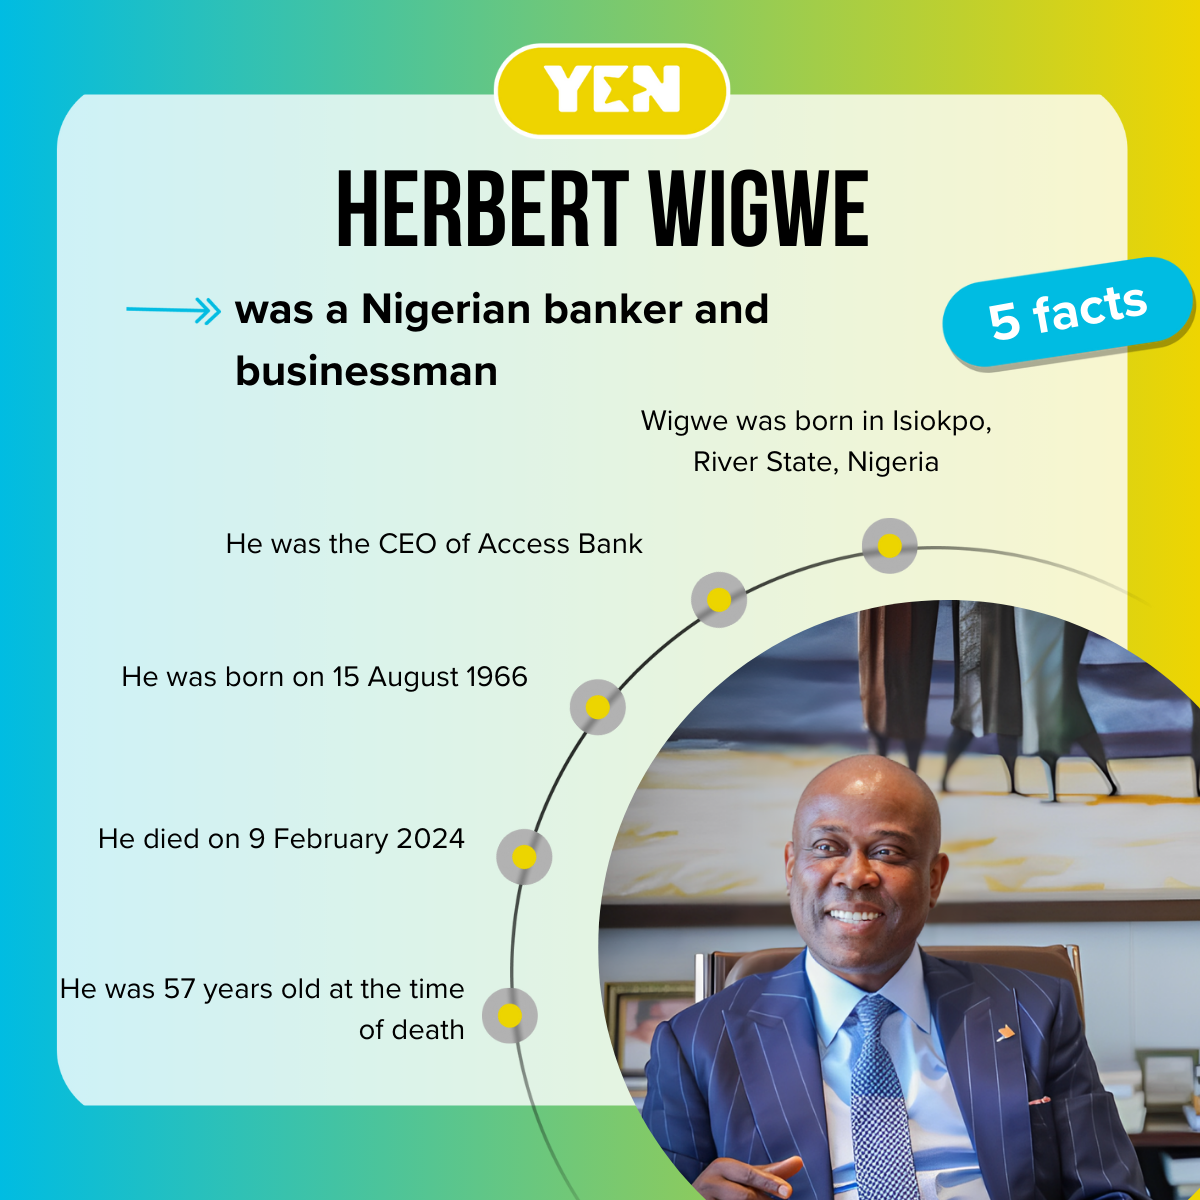 Facts about Herbert Wigwe